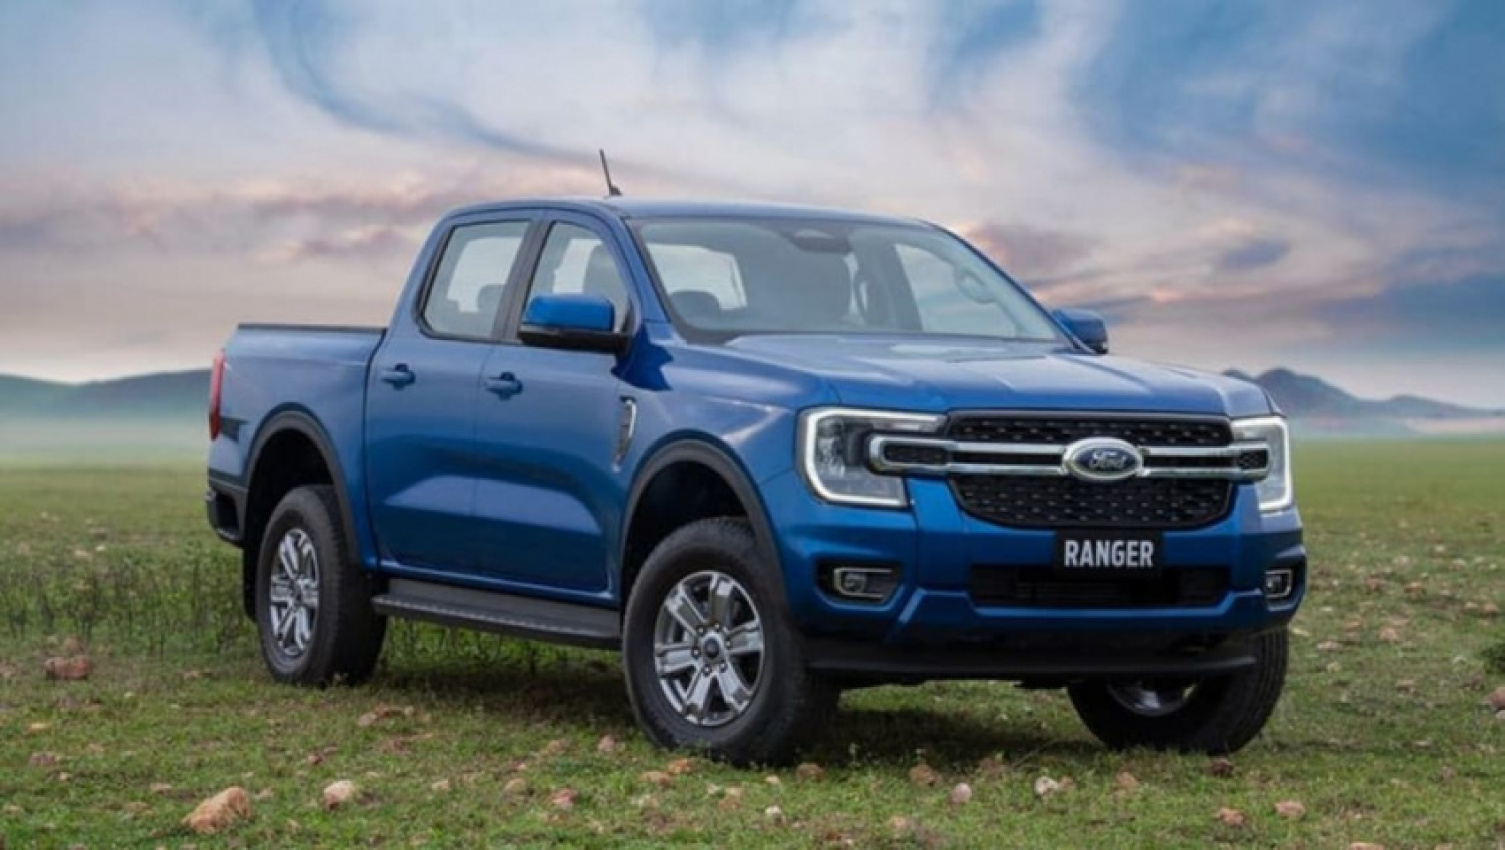 autos, cars, commercial, family cars, ford news, ford ranger, ford ranger 2022, ford ute range, industry news, isuzu d-max, isuzu d-max 2022, isuzu news, isuzu ute range, mazda bt-50, mazda bt-50 2022, mazda news, mazda ute range, off-road, showroom news, volkswagen, volkswagen amarok, volkswagen amarok 2022, volkswagen news, volkswagen ute range, best utes arriving in 2022